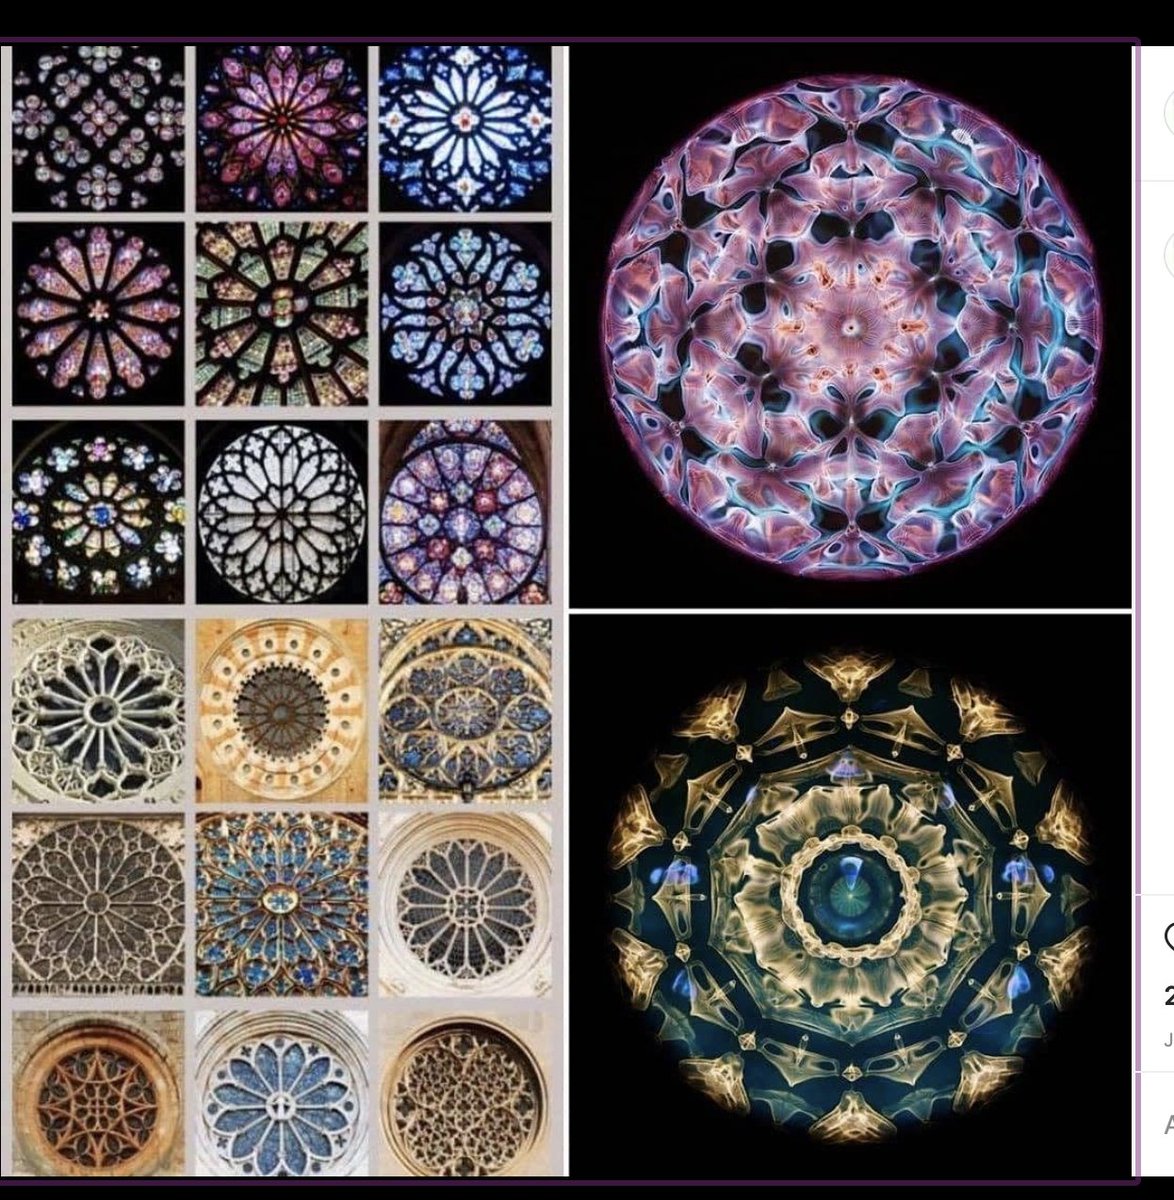 Cymatics. In Greek meaning "Wave". Sound and Vibration.The 1st pict shows the how high frequency creates amazing intimate patterns like the Cathedral Windows while low frequency (disease) creates simple forms.